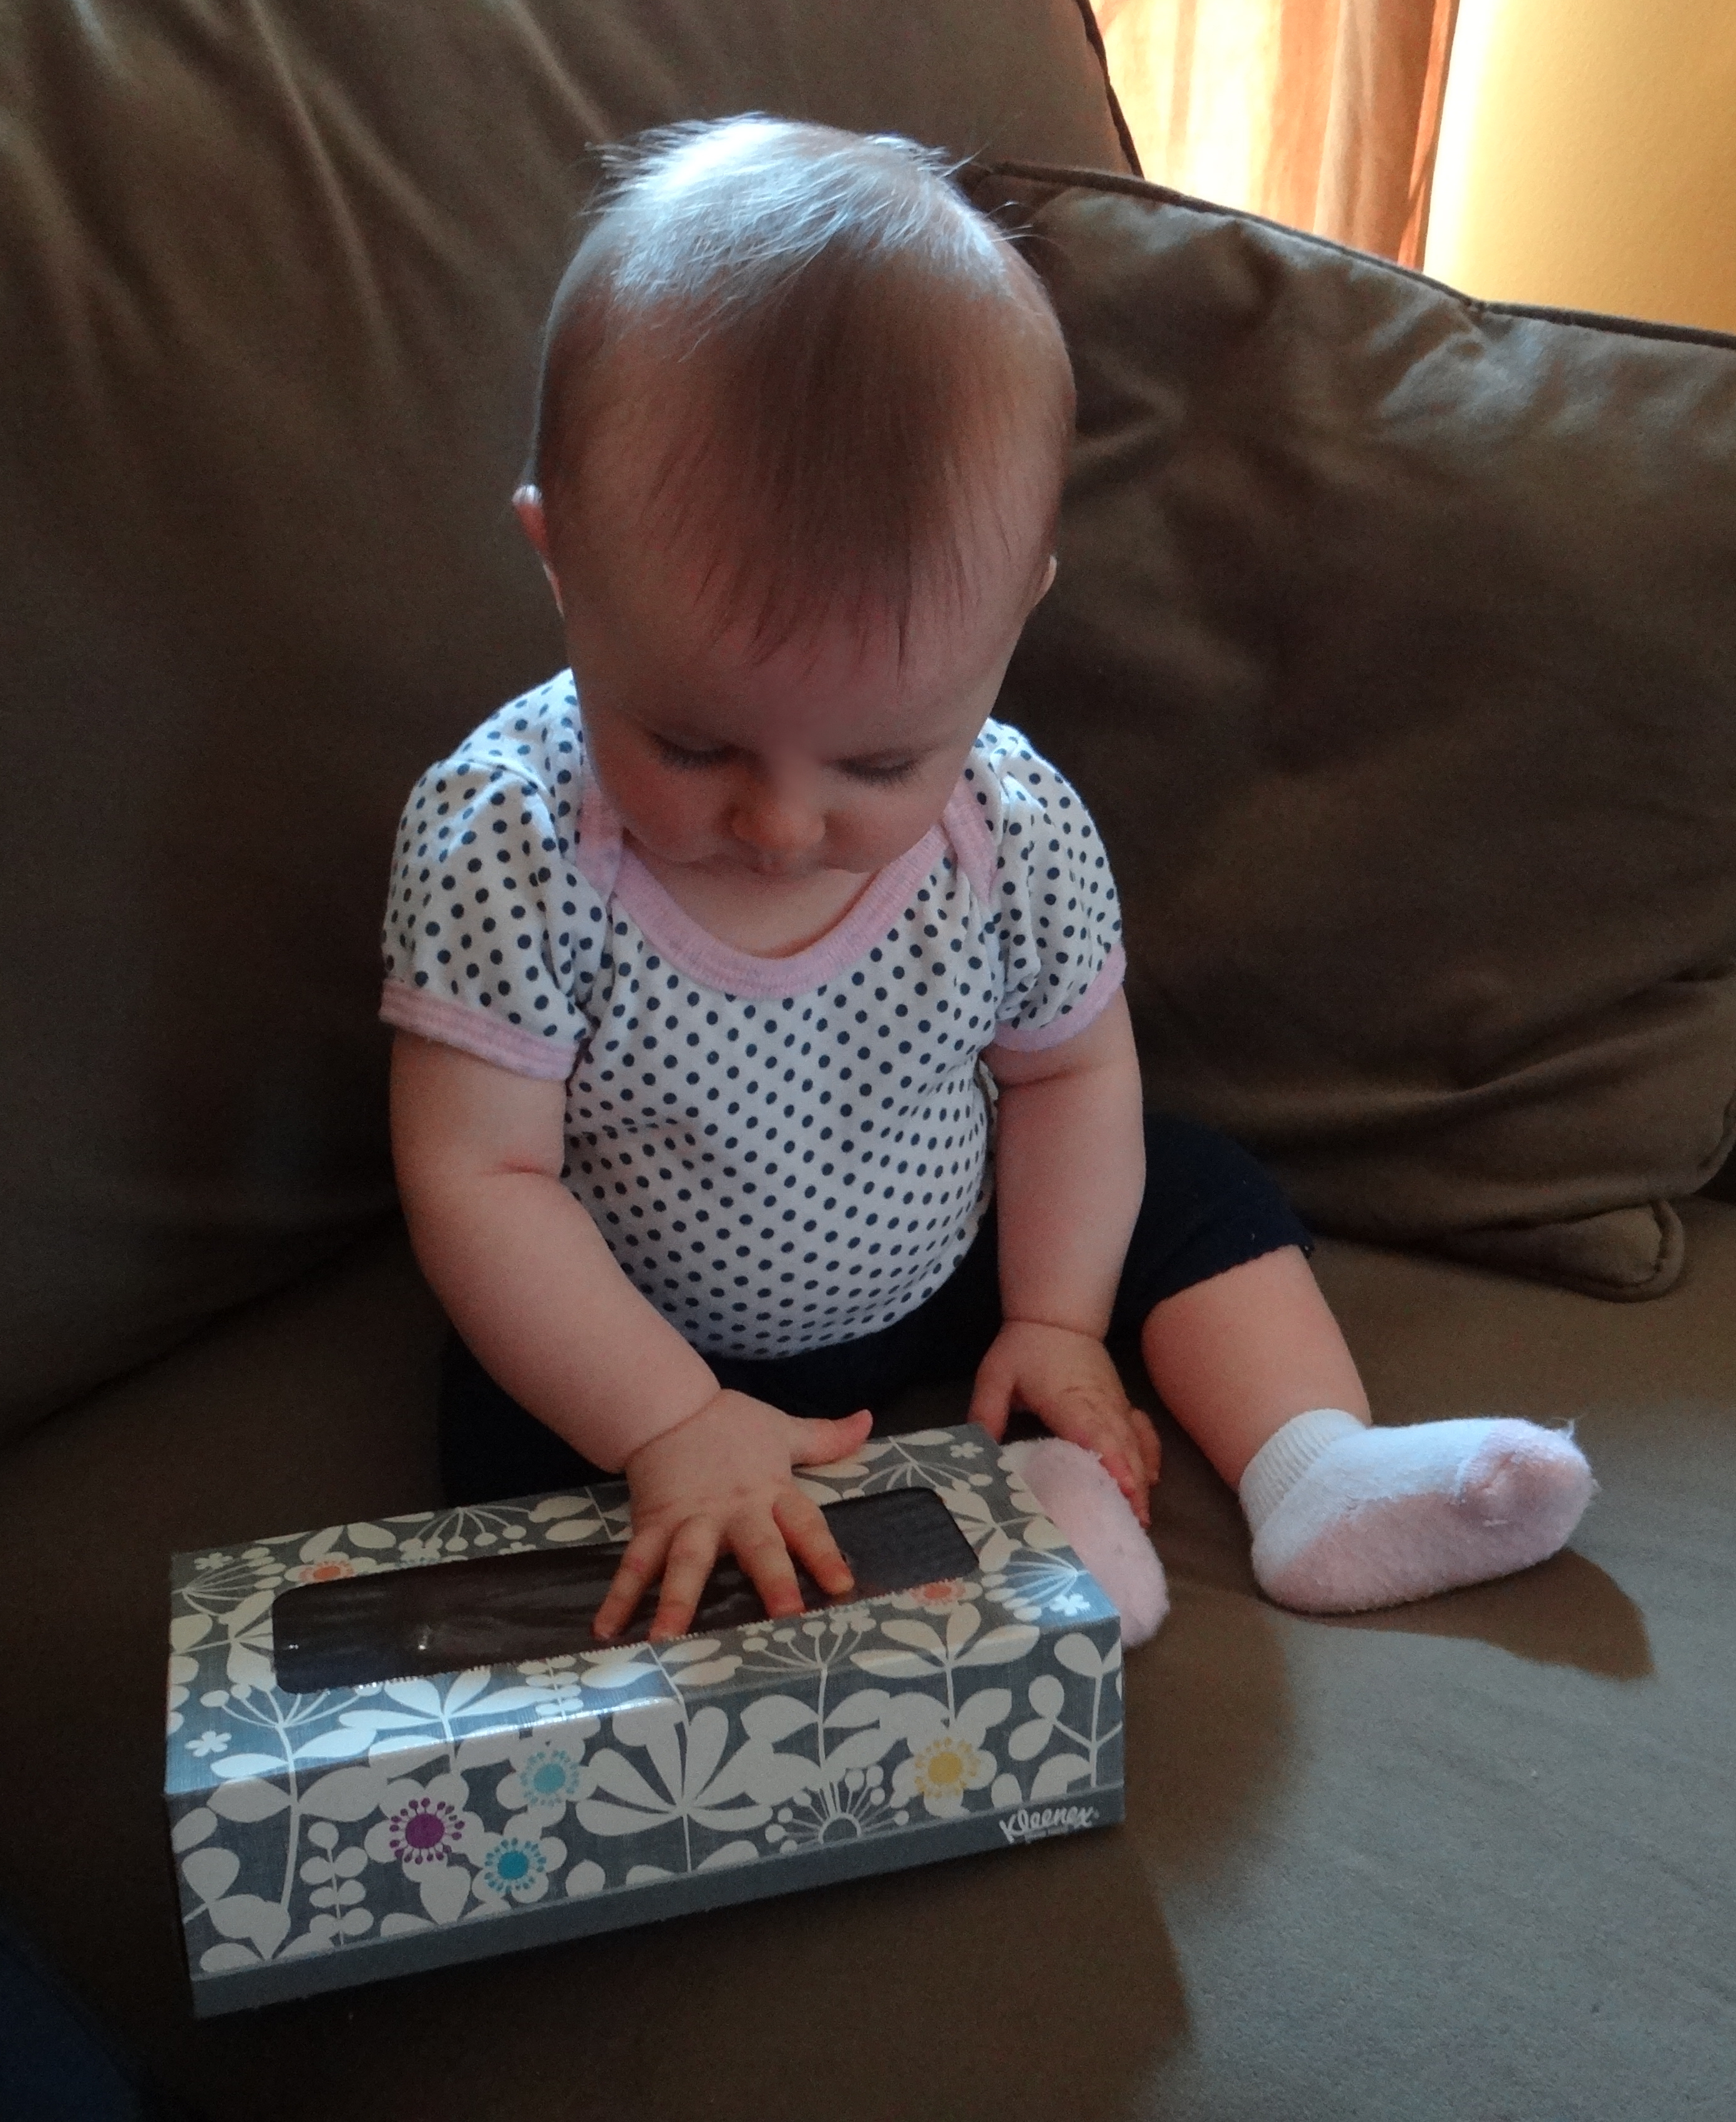 Baby playing with a tissue box